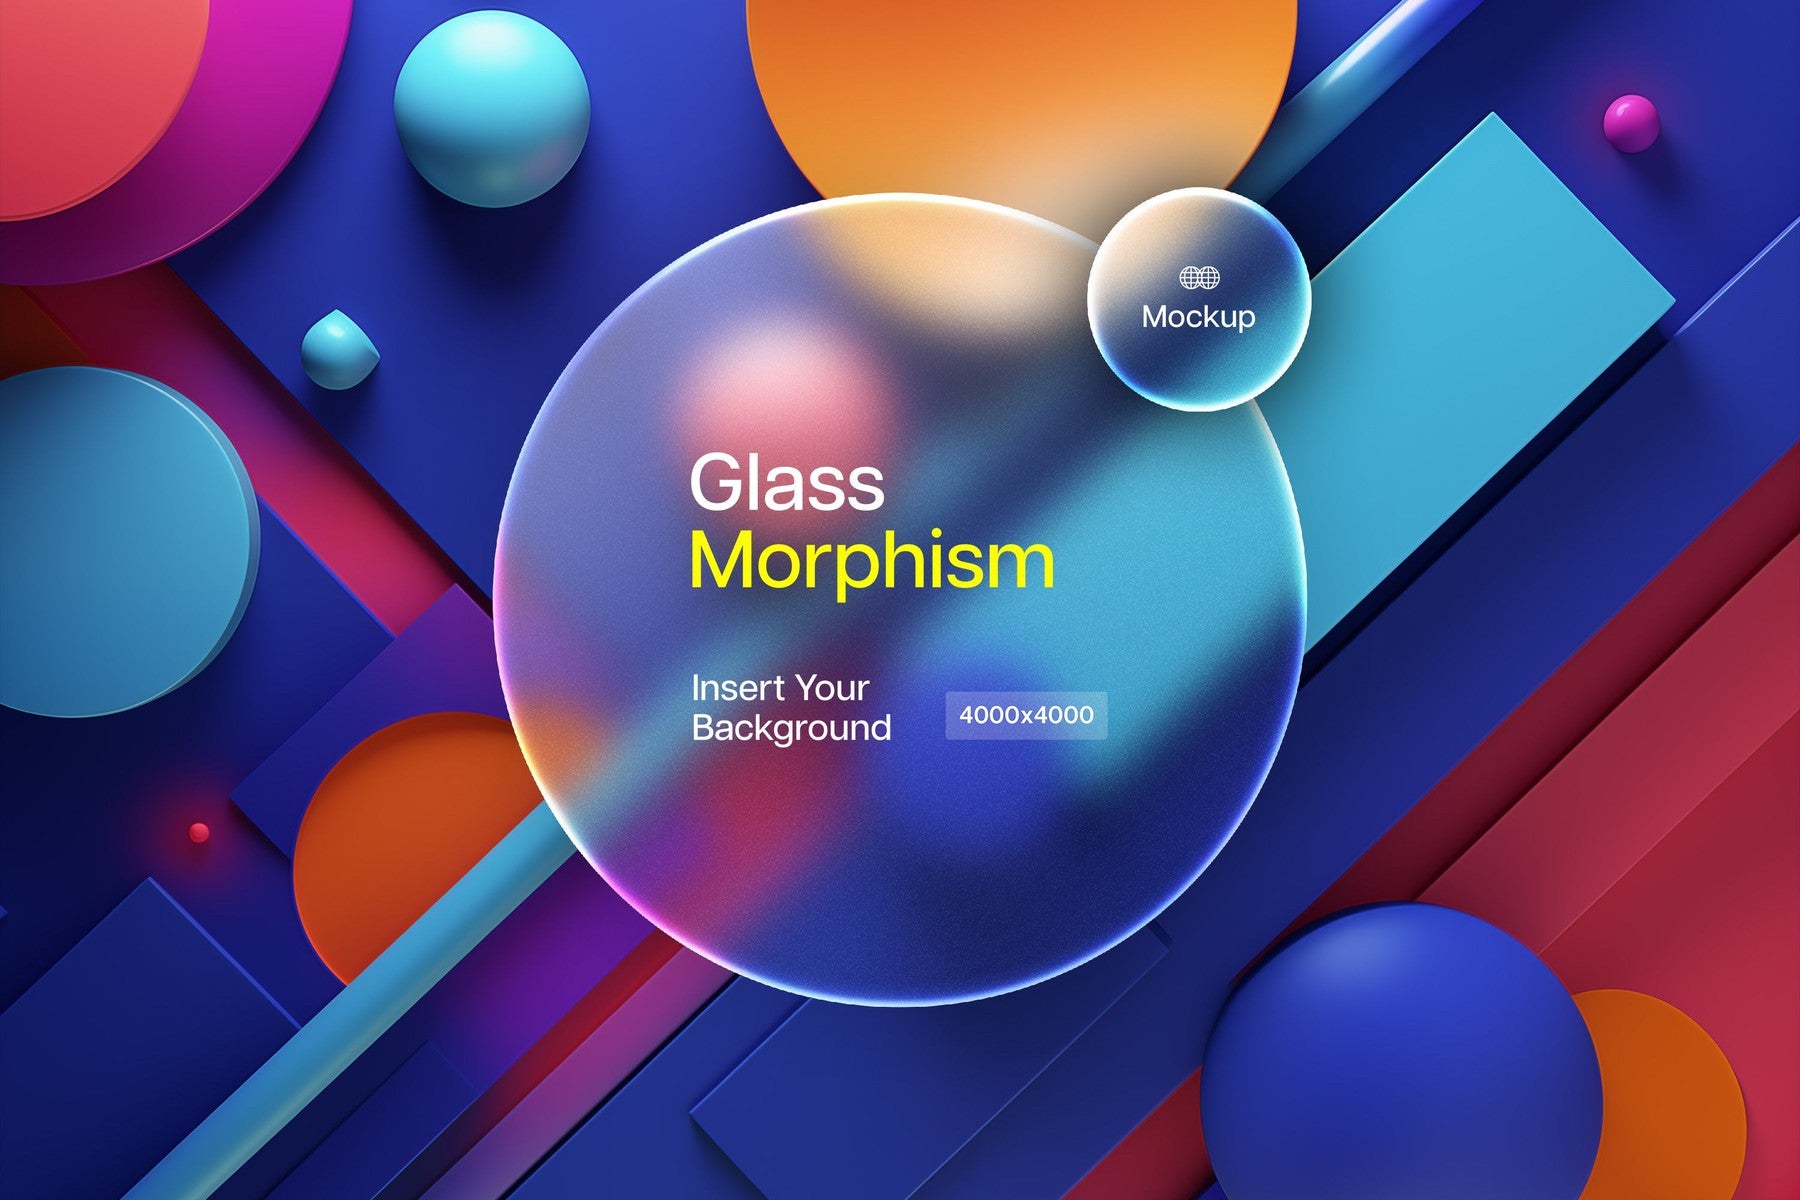 Glass Morphism Frosted Mockups